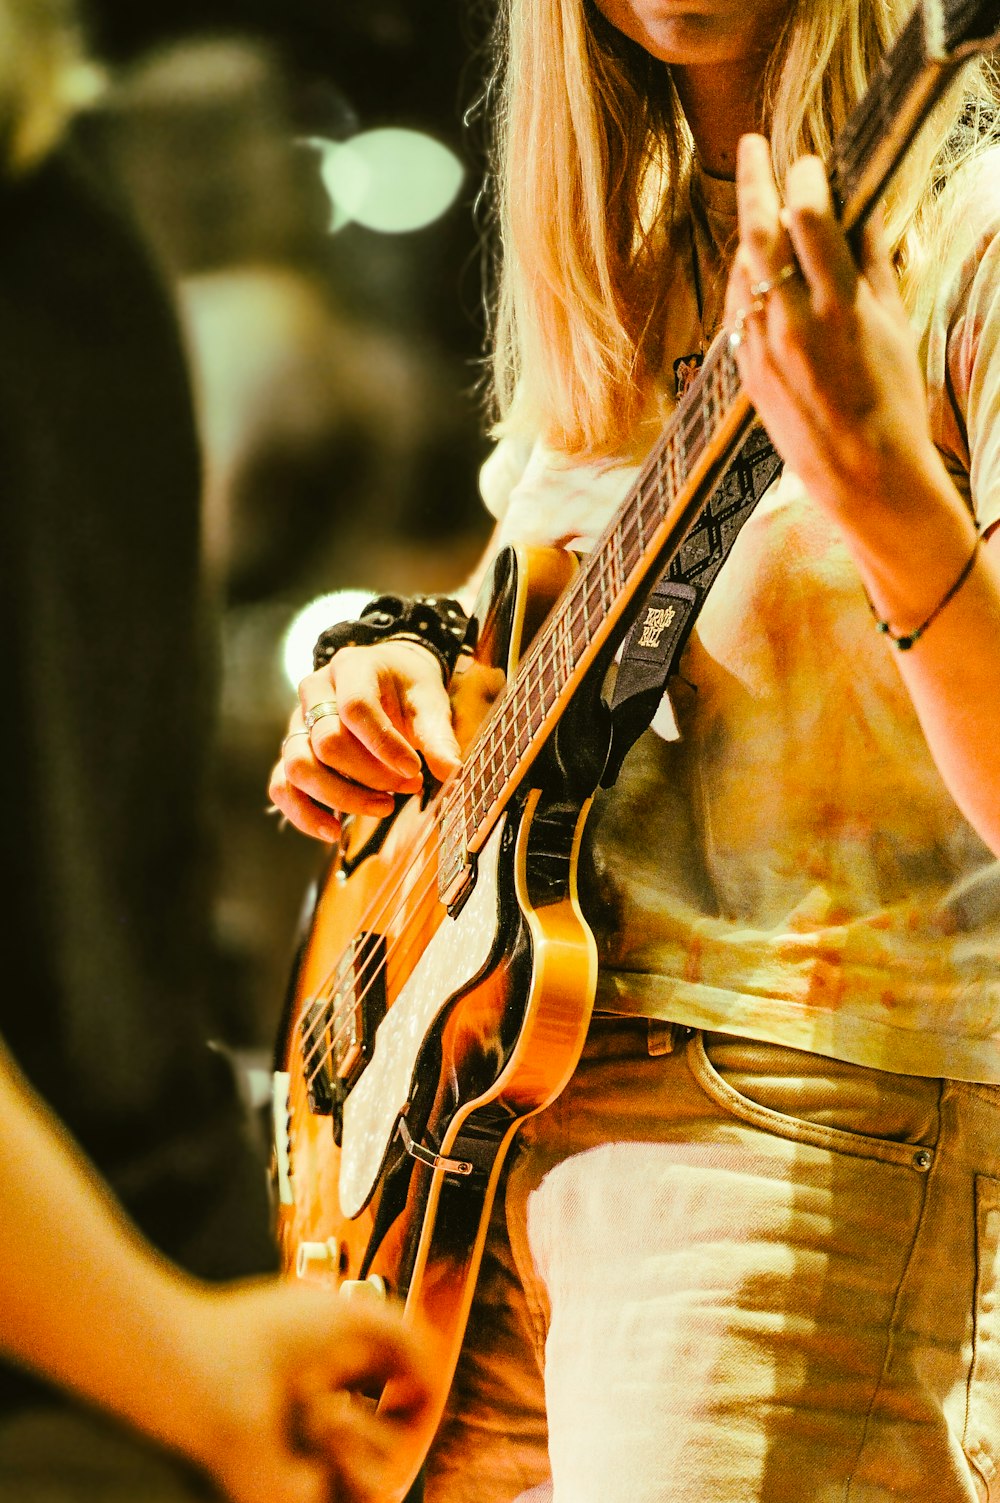 a woman playing a guitar in a band